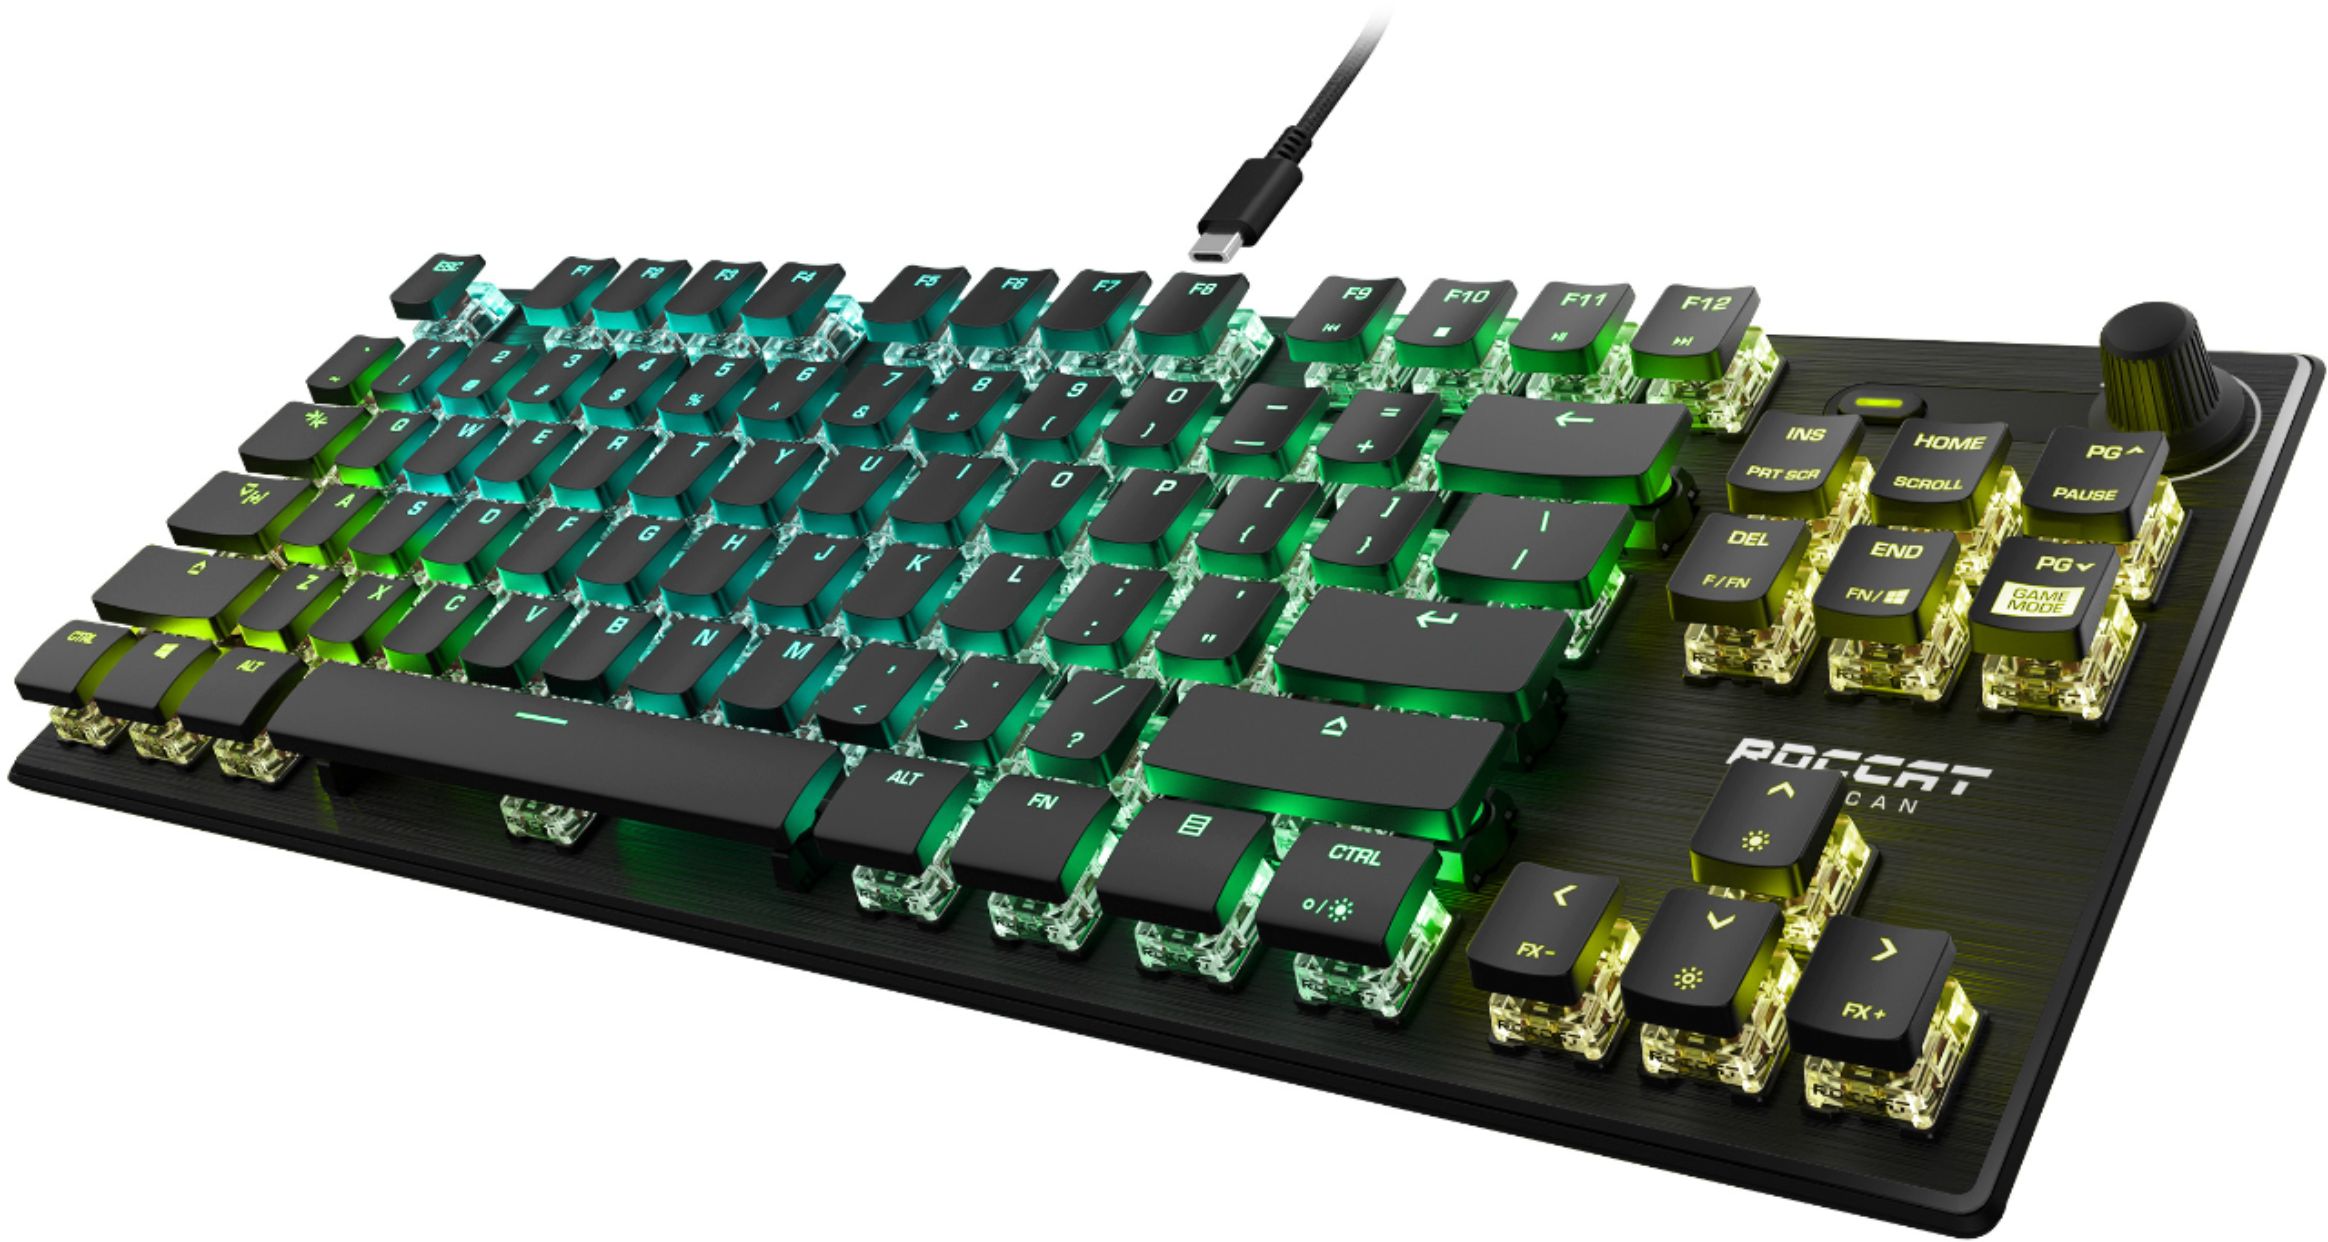 Best Buy: ROCCAT Vulcan TKL Pro Compact PC Gaming Keyboard with 